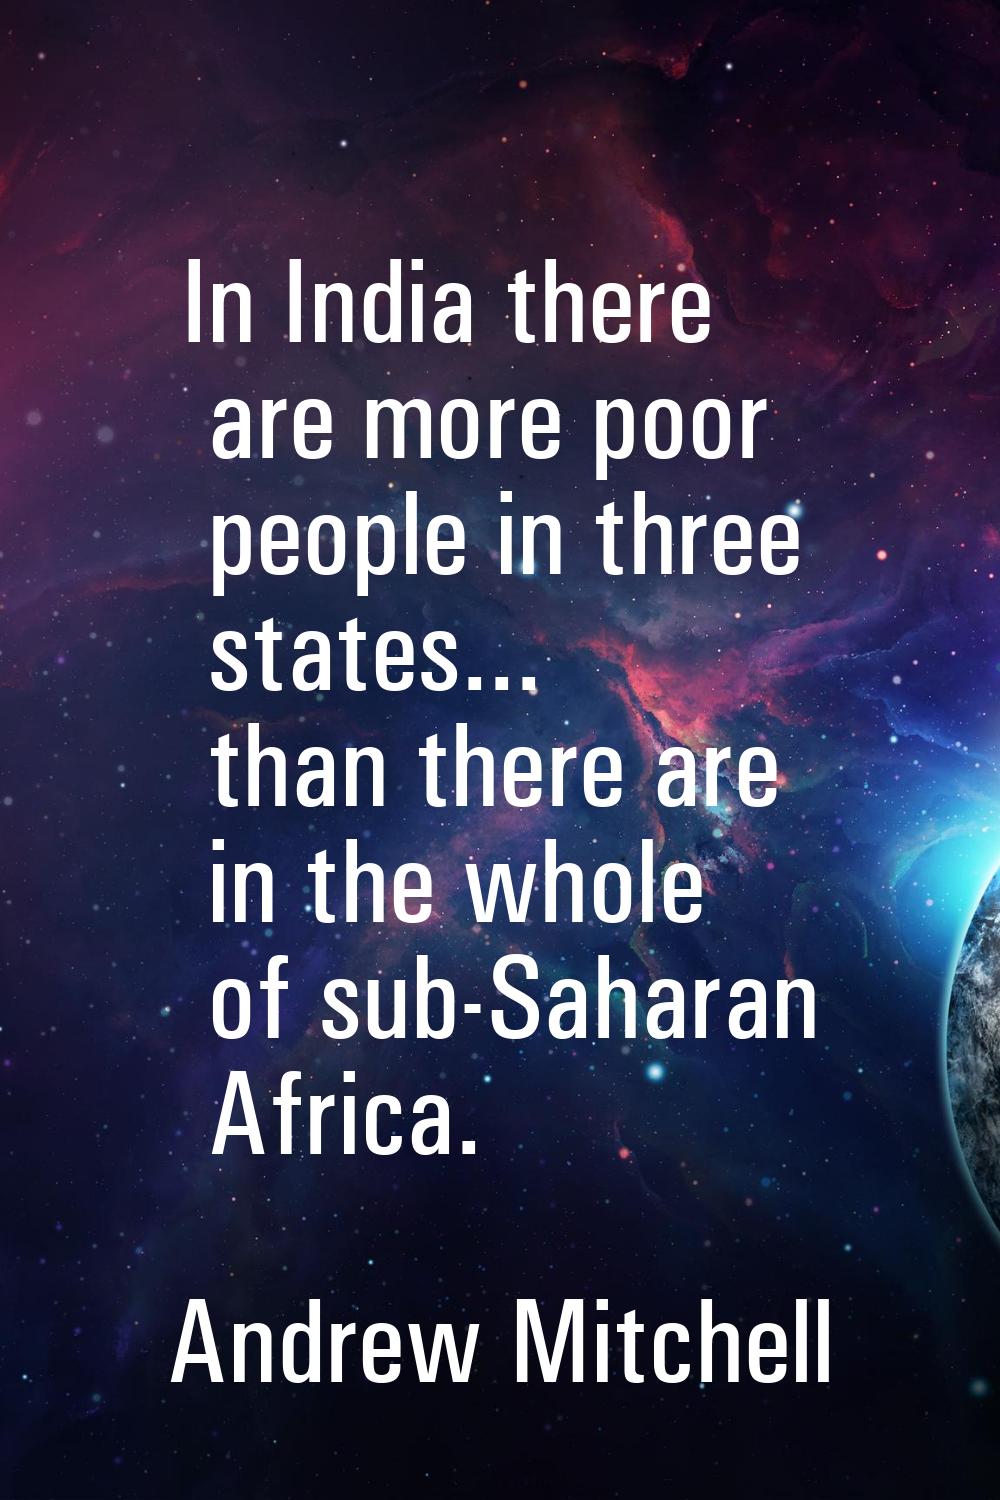 In India there are more poor people in three states... than there are in the whole of sub-Saharan A